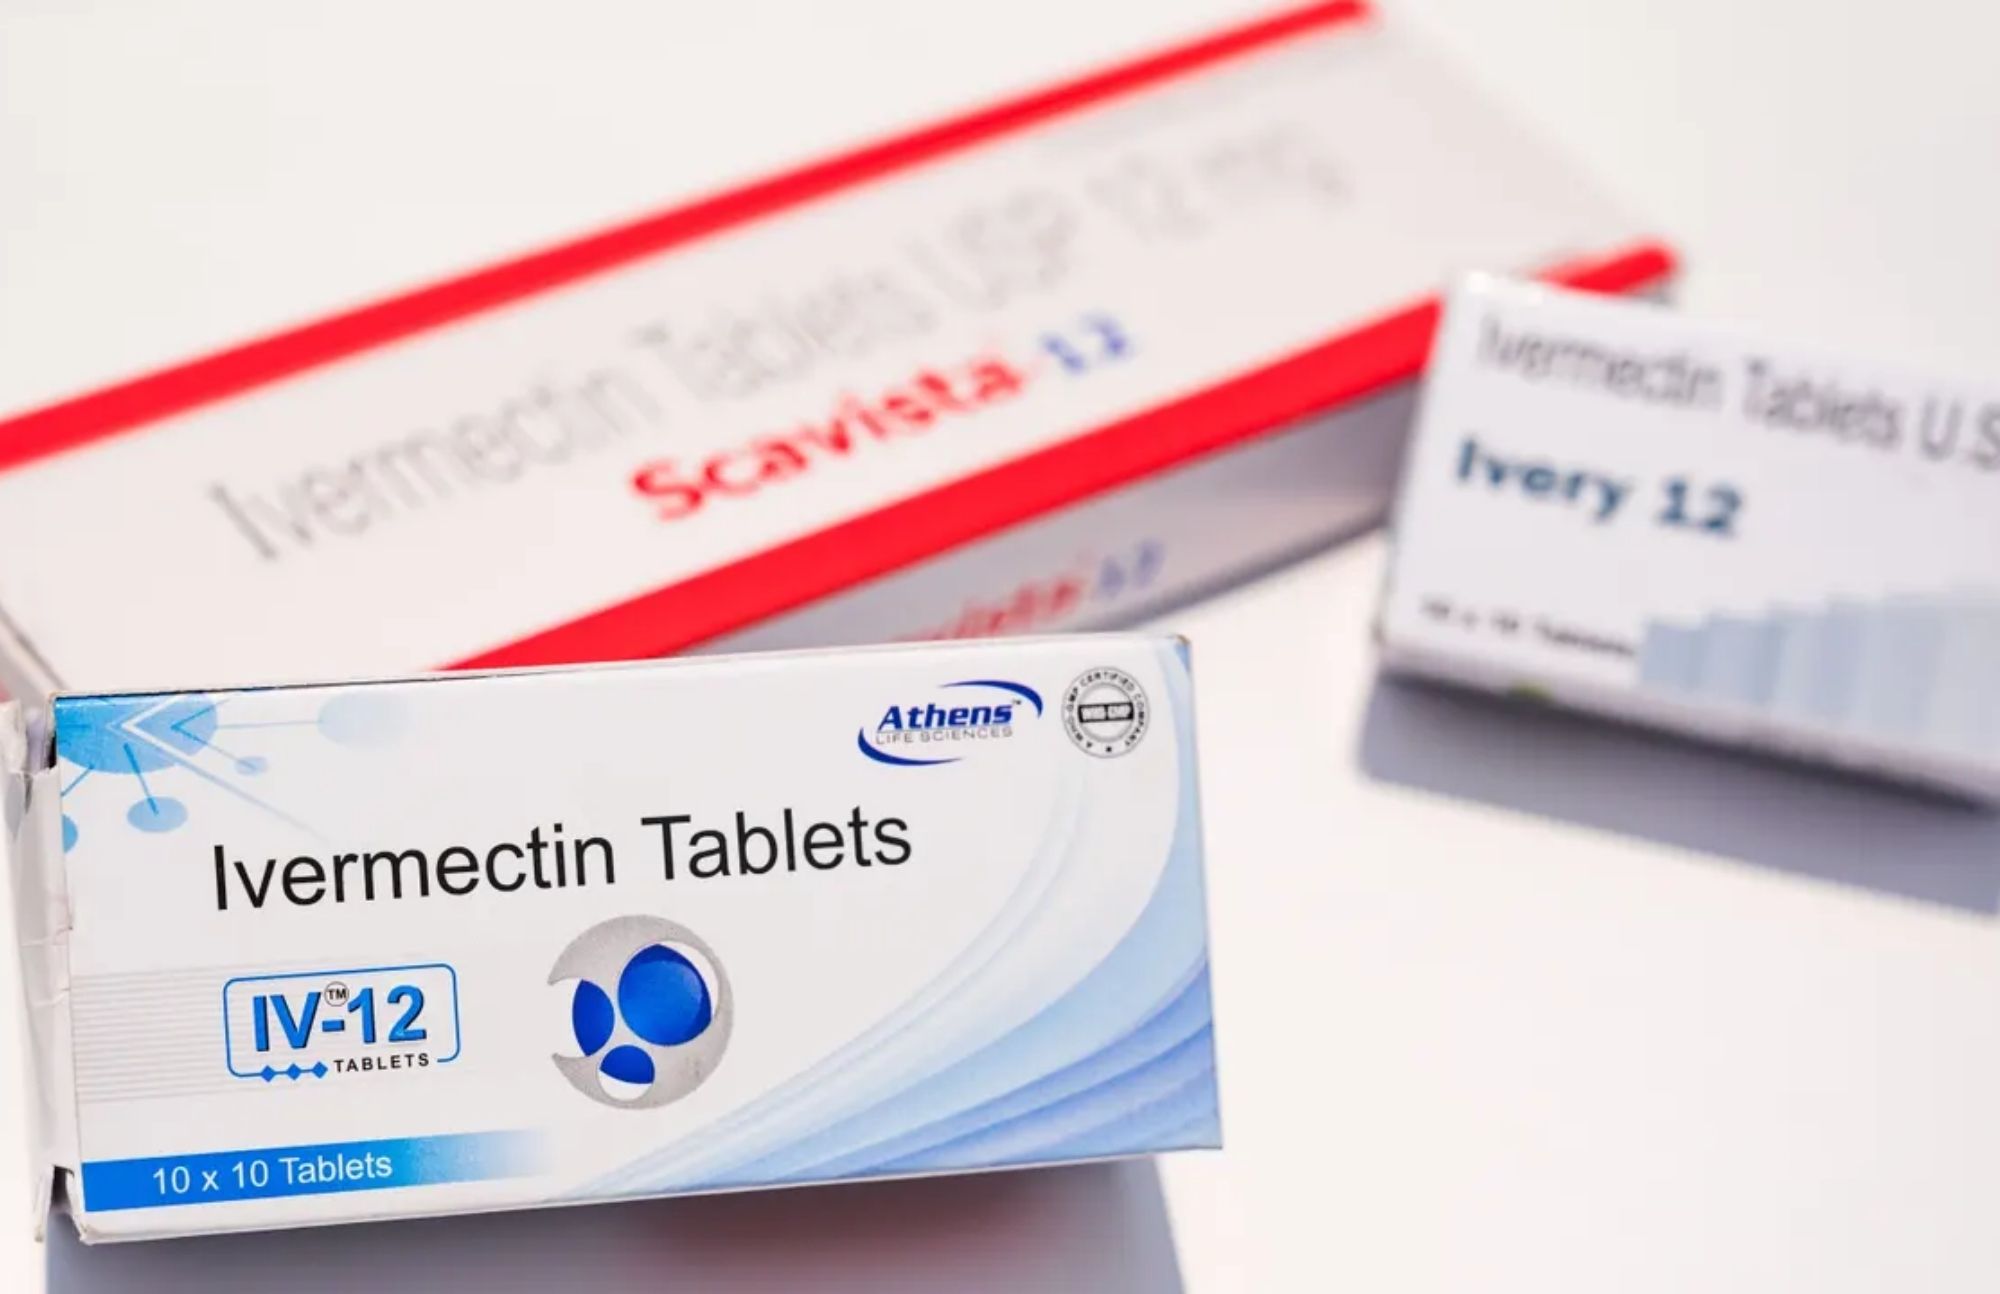 Three boxes of Ivermectin Tablets under the white surface